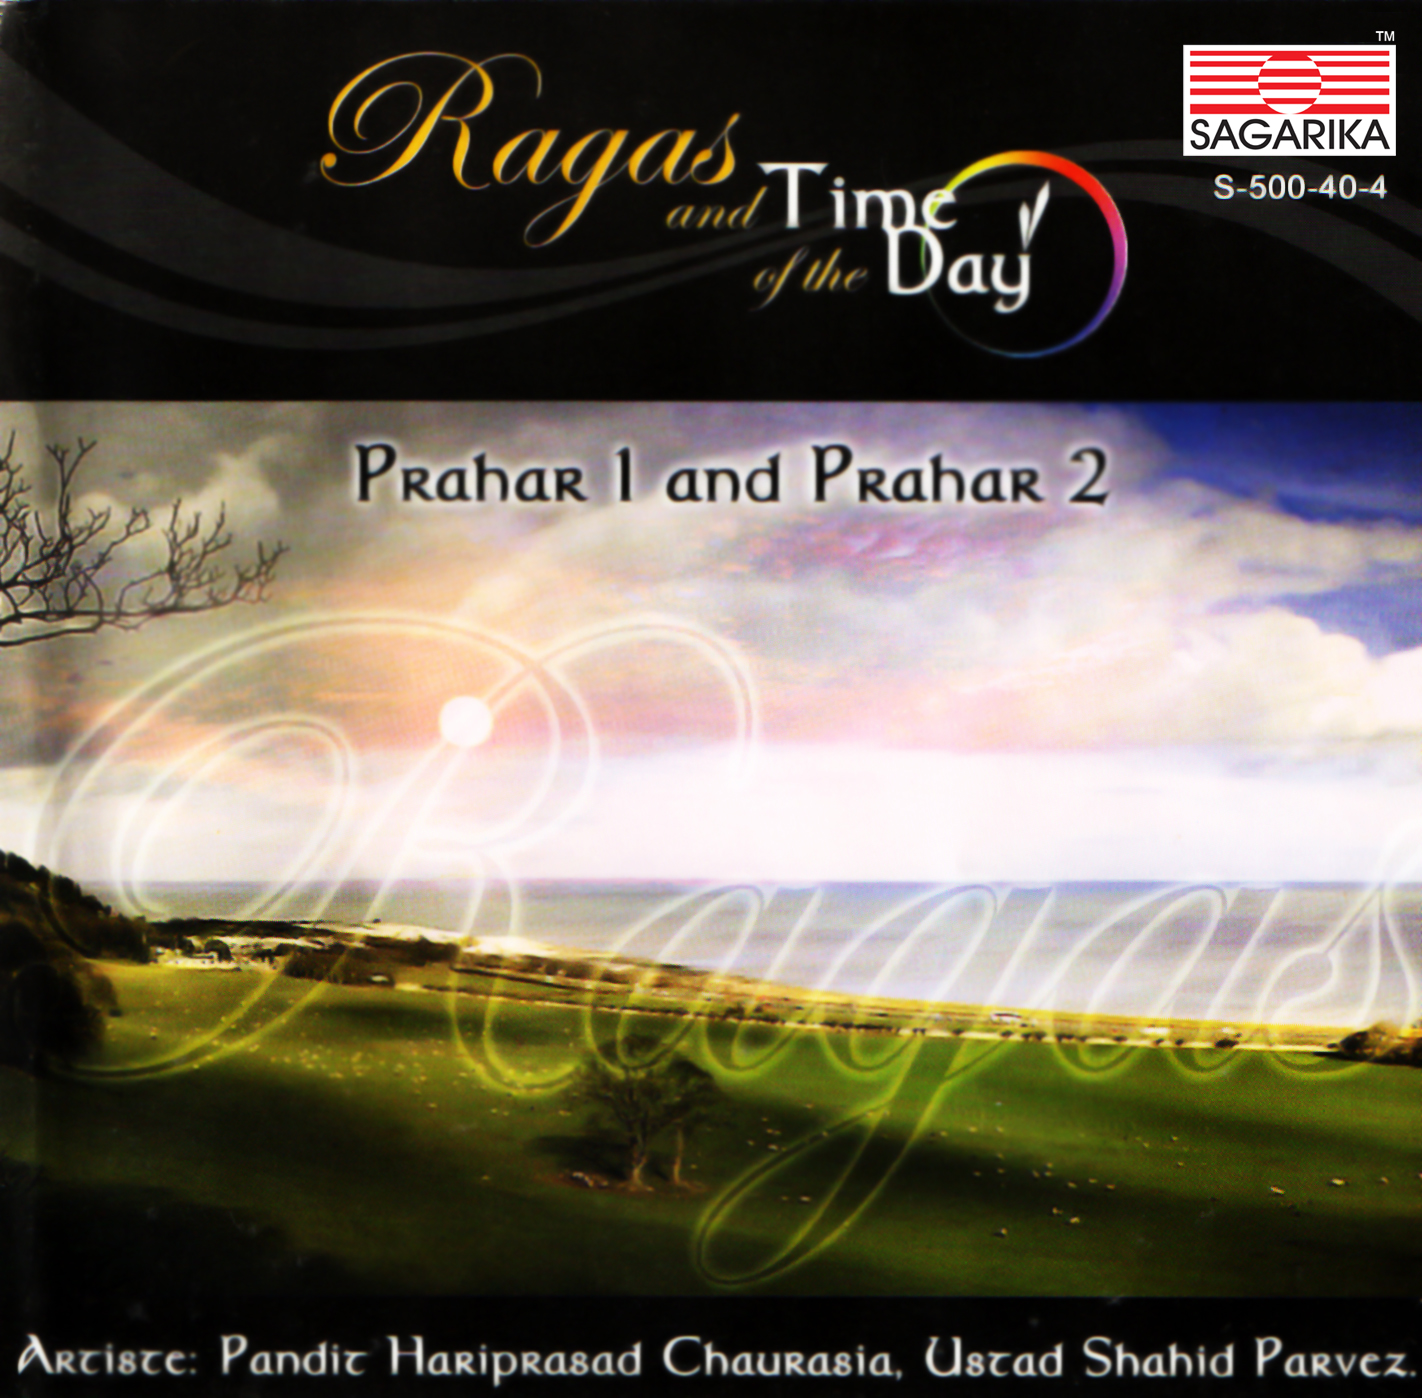 Ragas And Times Of The Day – Prahar 1 & 2